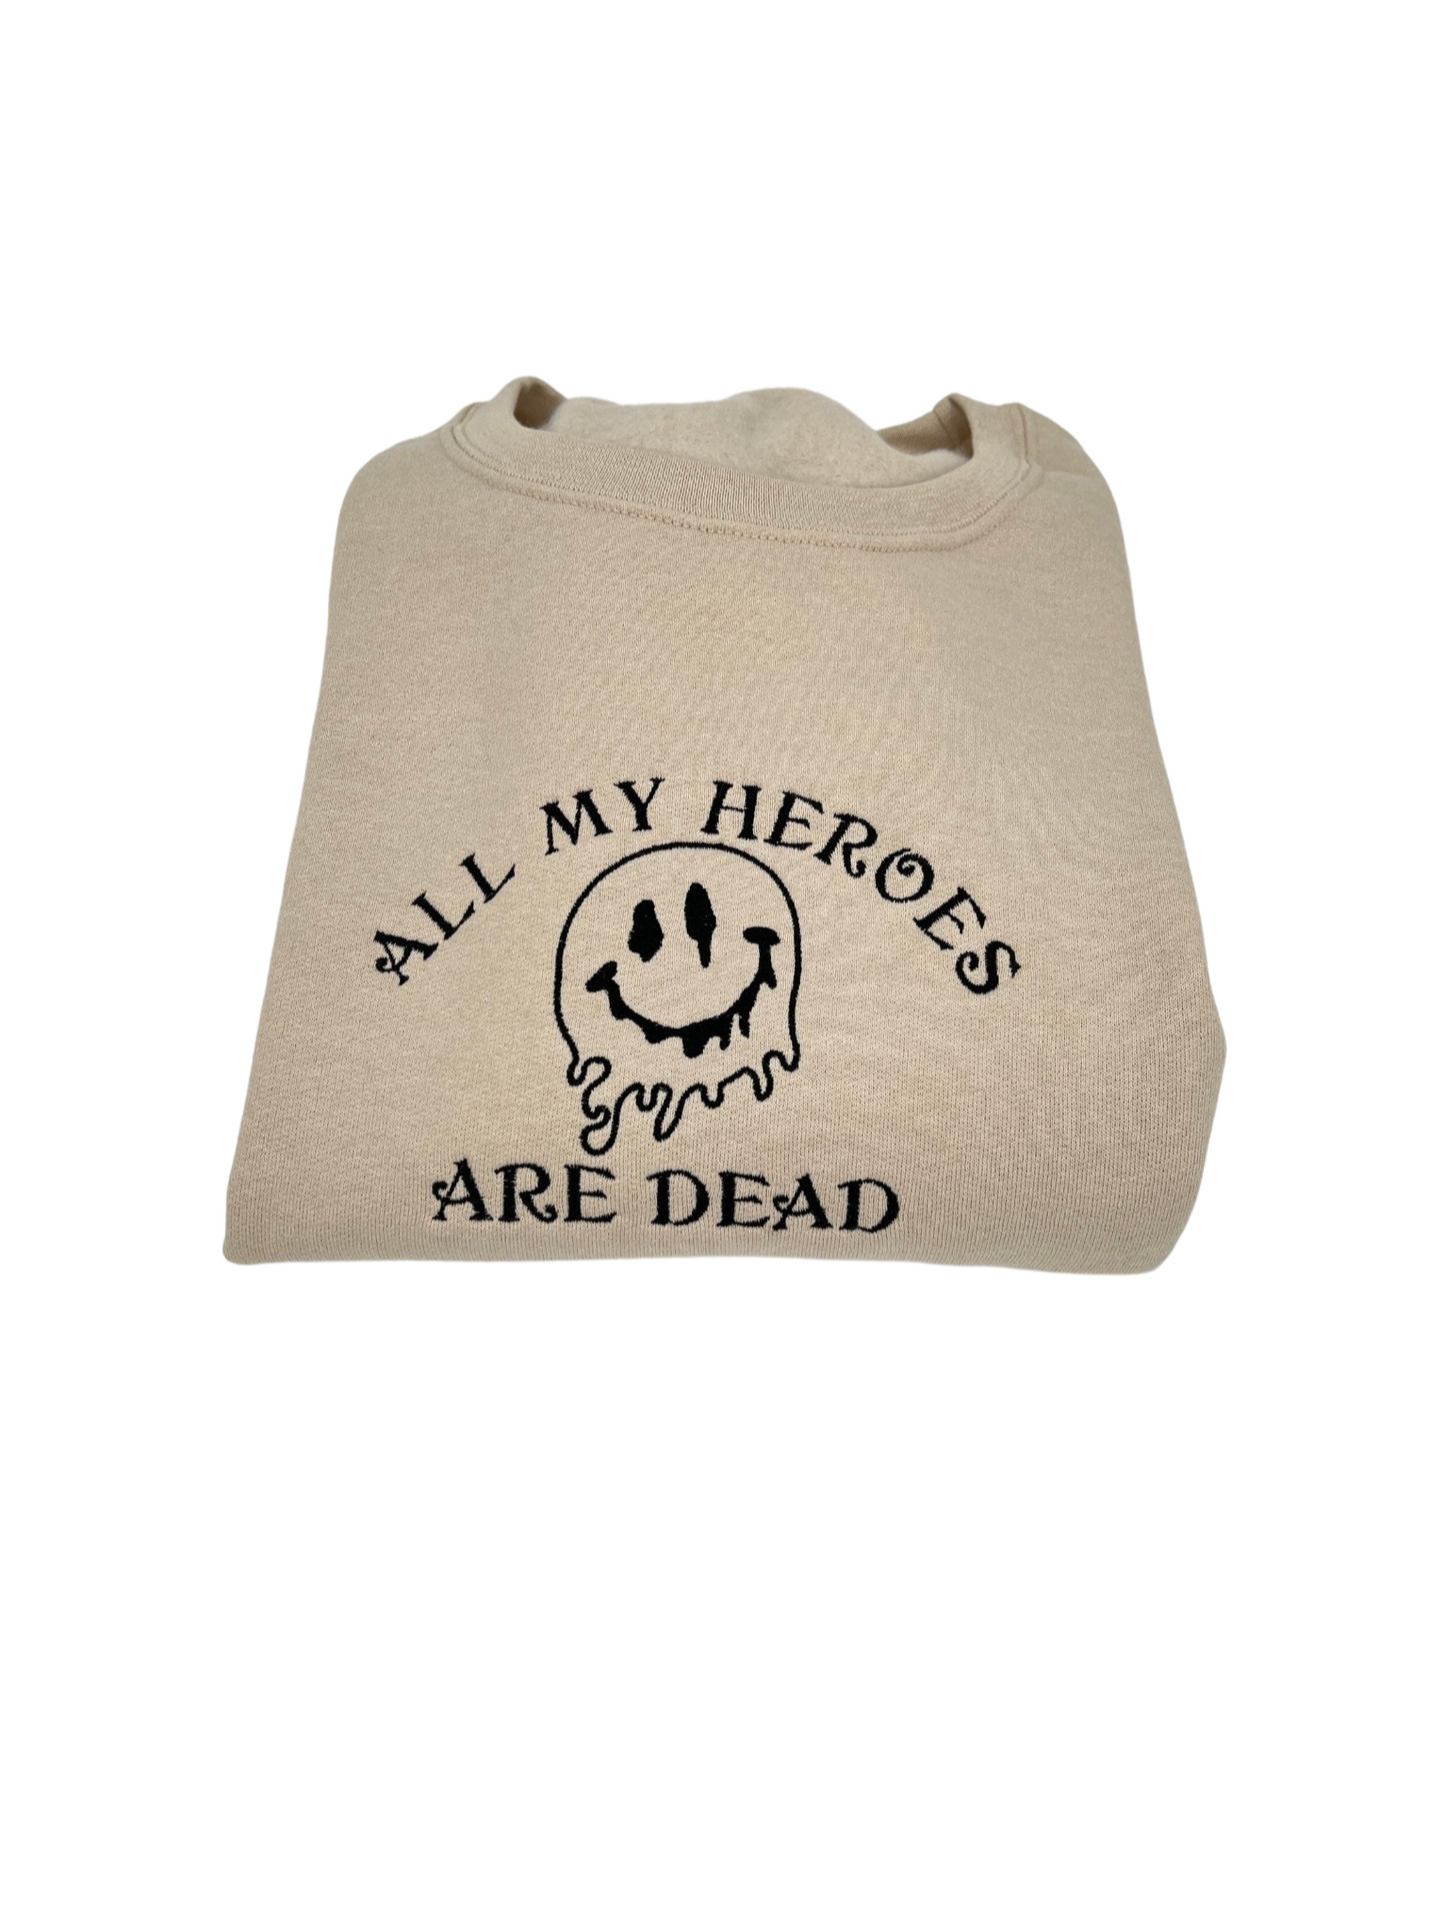 All My Heroes Are Dead Embroidered Crewneck